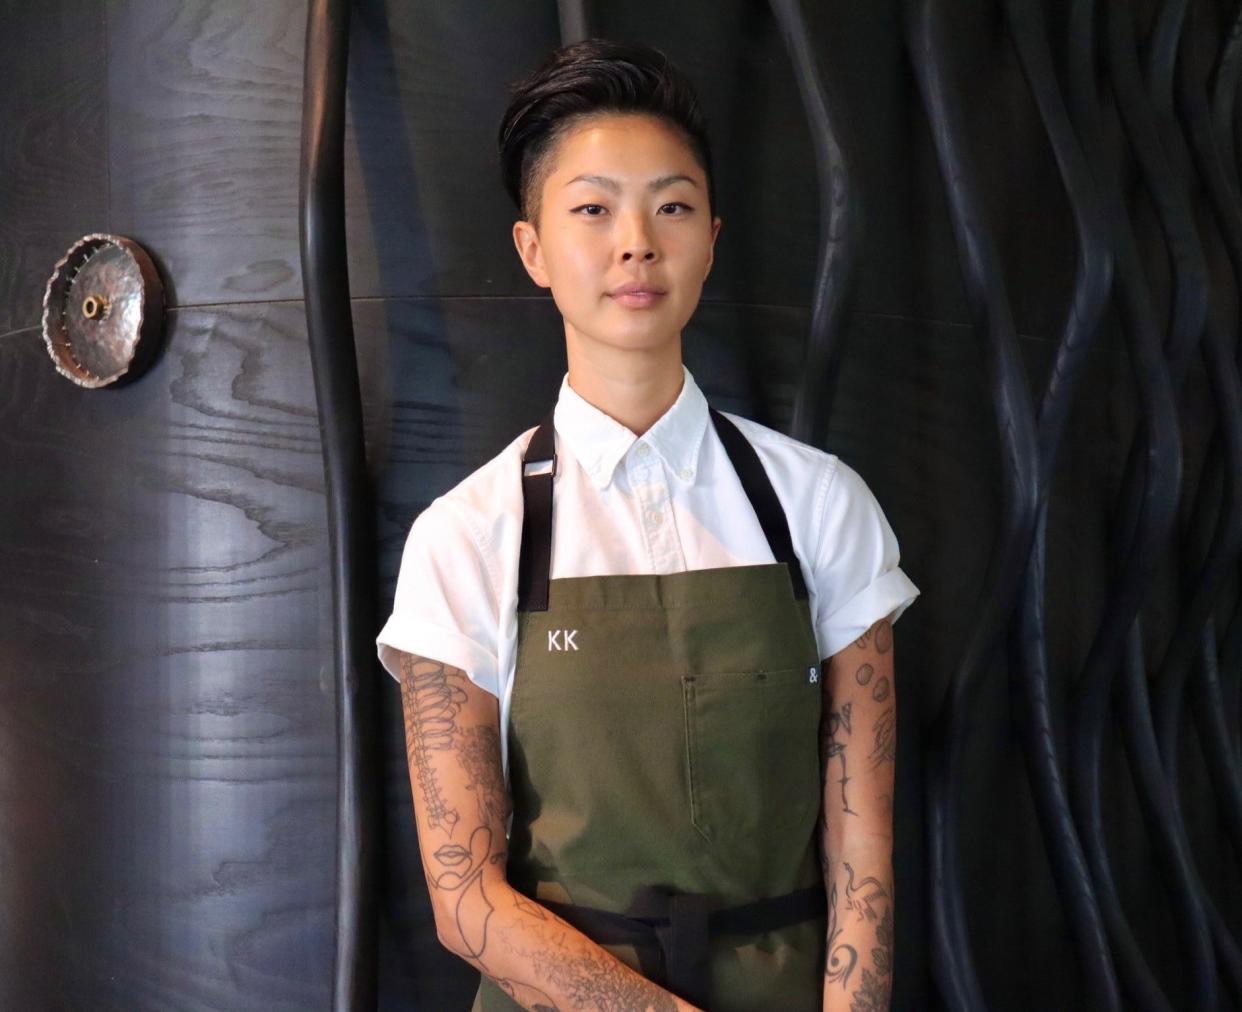 Kristen Kish was named host of Bravo's "Top Chef" earlier this year.